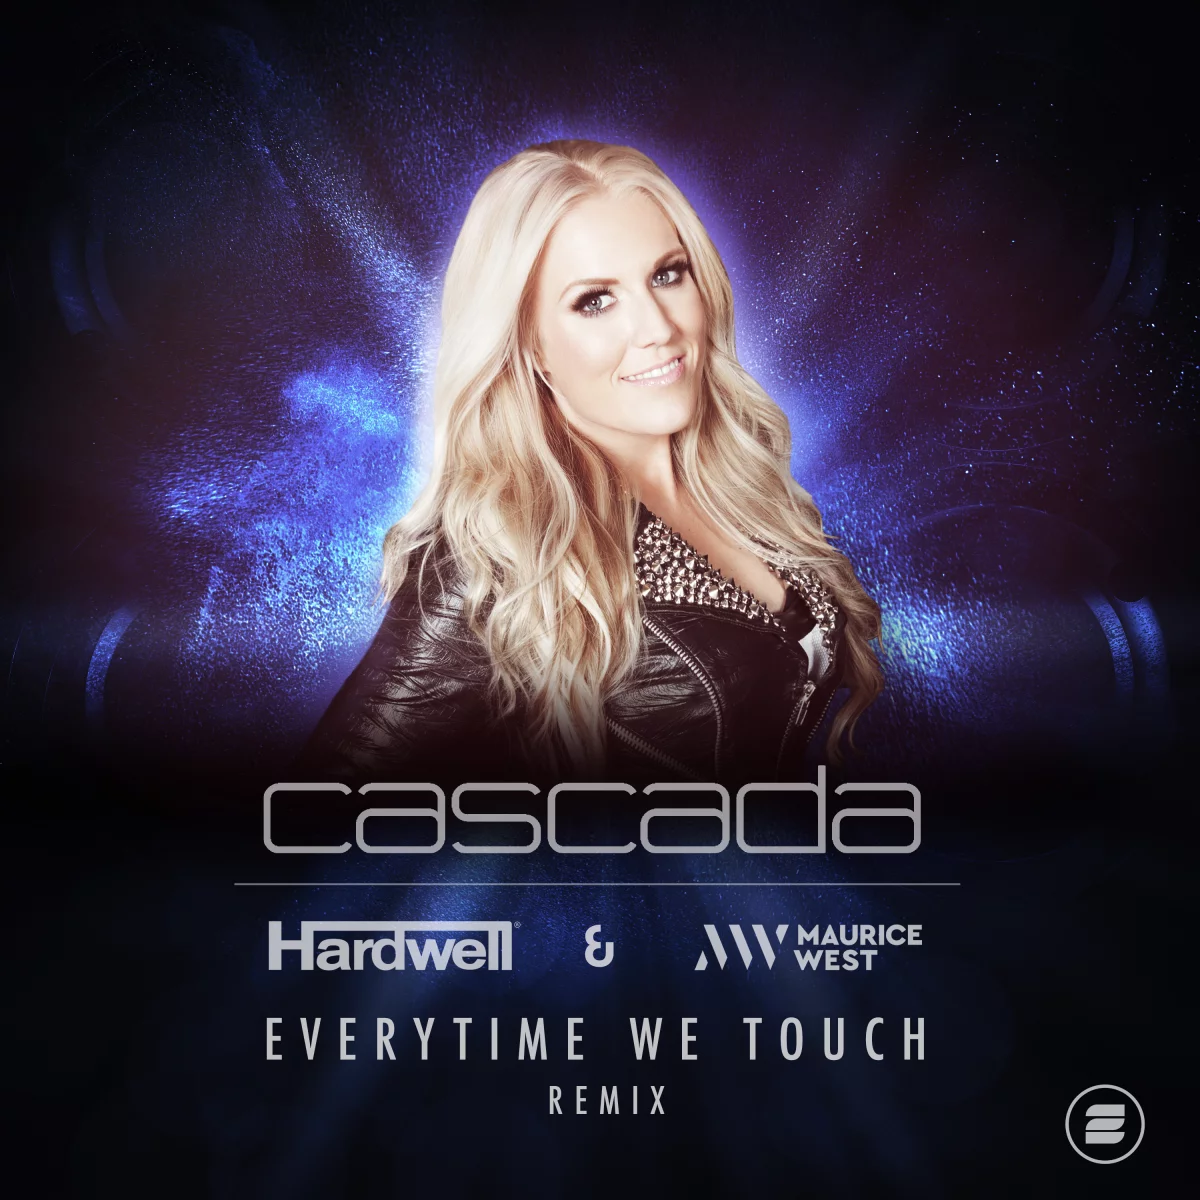 Everytime We Touch (Hardwell & Maurice West Remix) - Cascada 